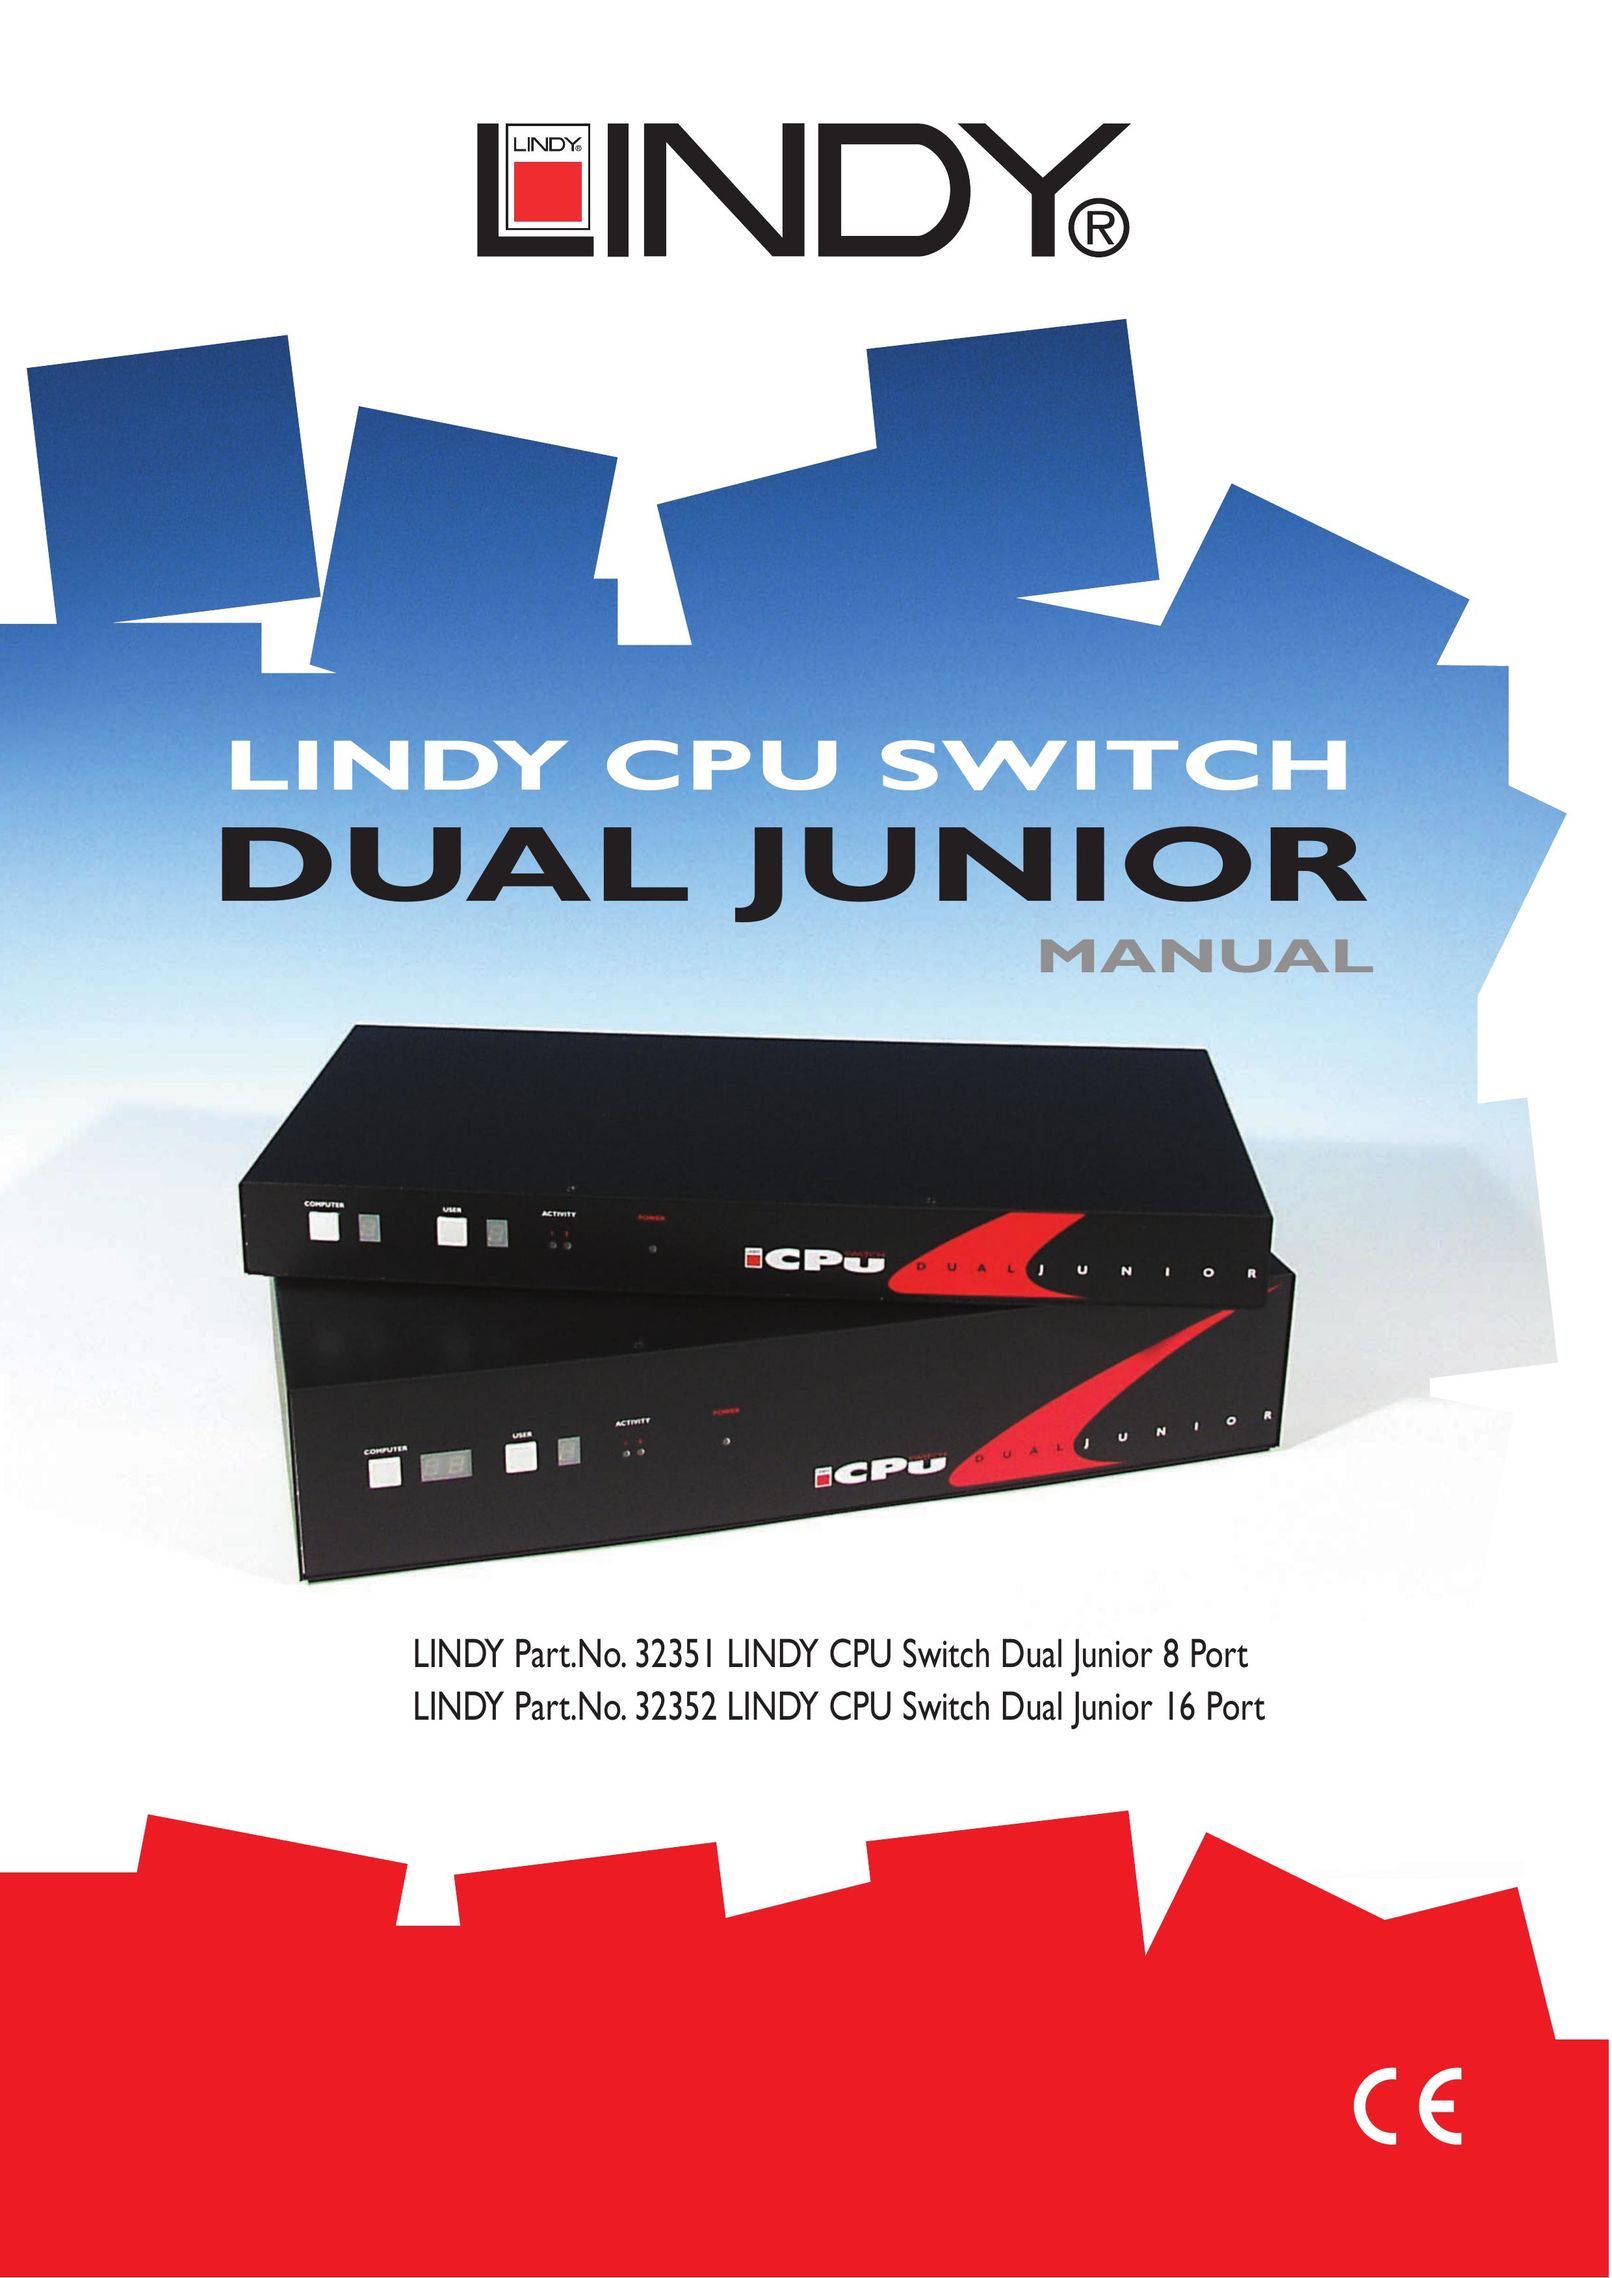 Lindy 32352 Network Card User Manual